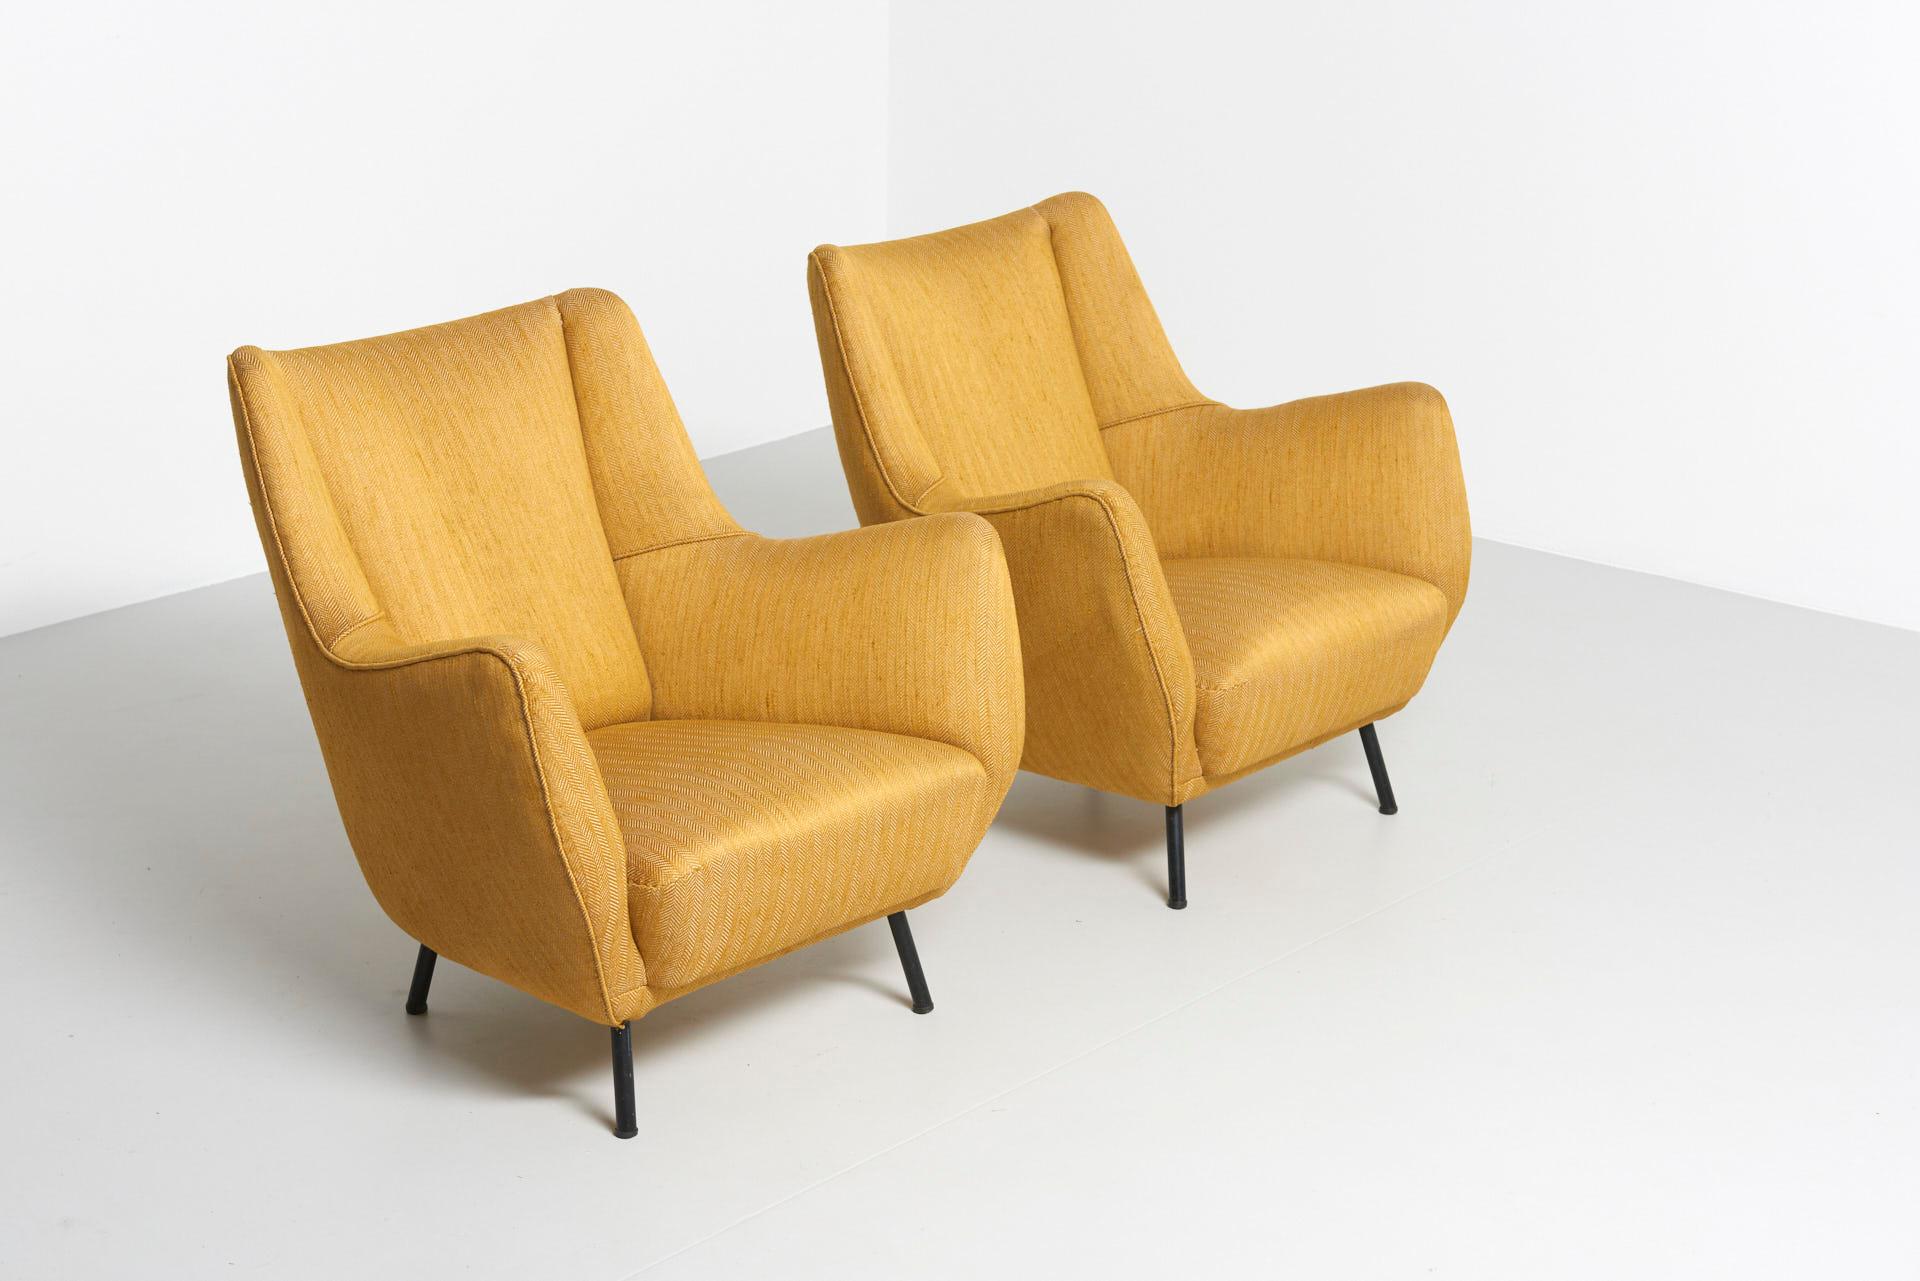 A pair Italian easy chairs in yellow herringbone fabric with black metal legs. In the style of Guglielmo Veronesi. Made in Italy in the 1950s.